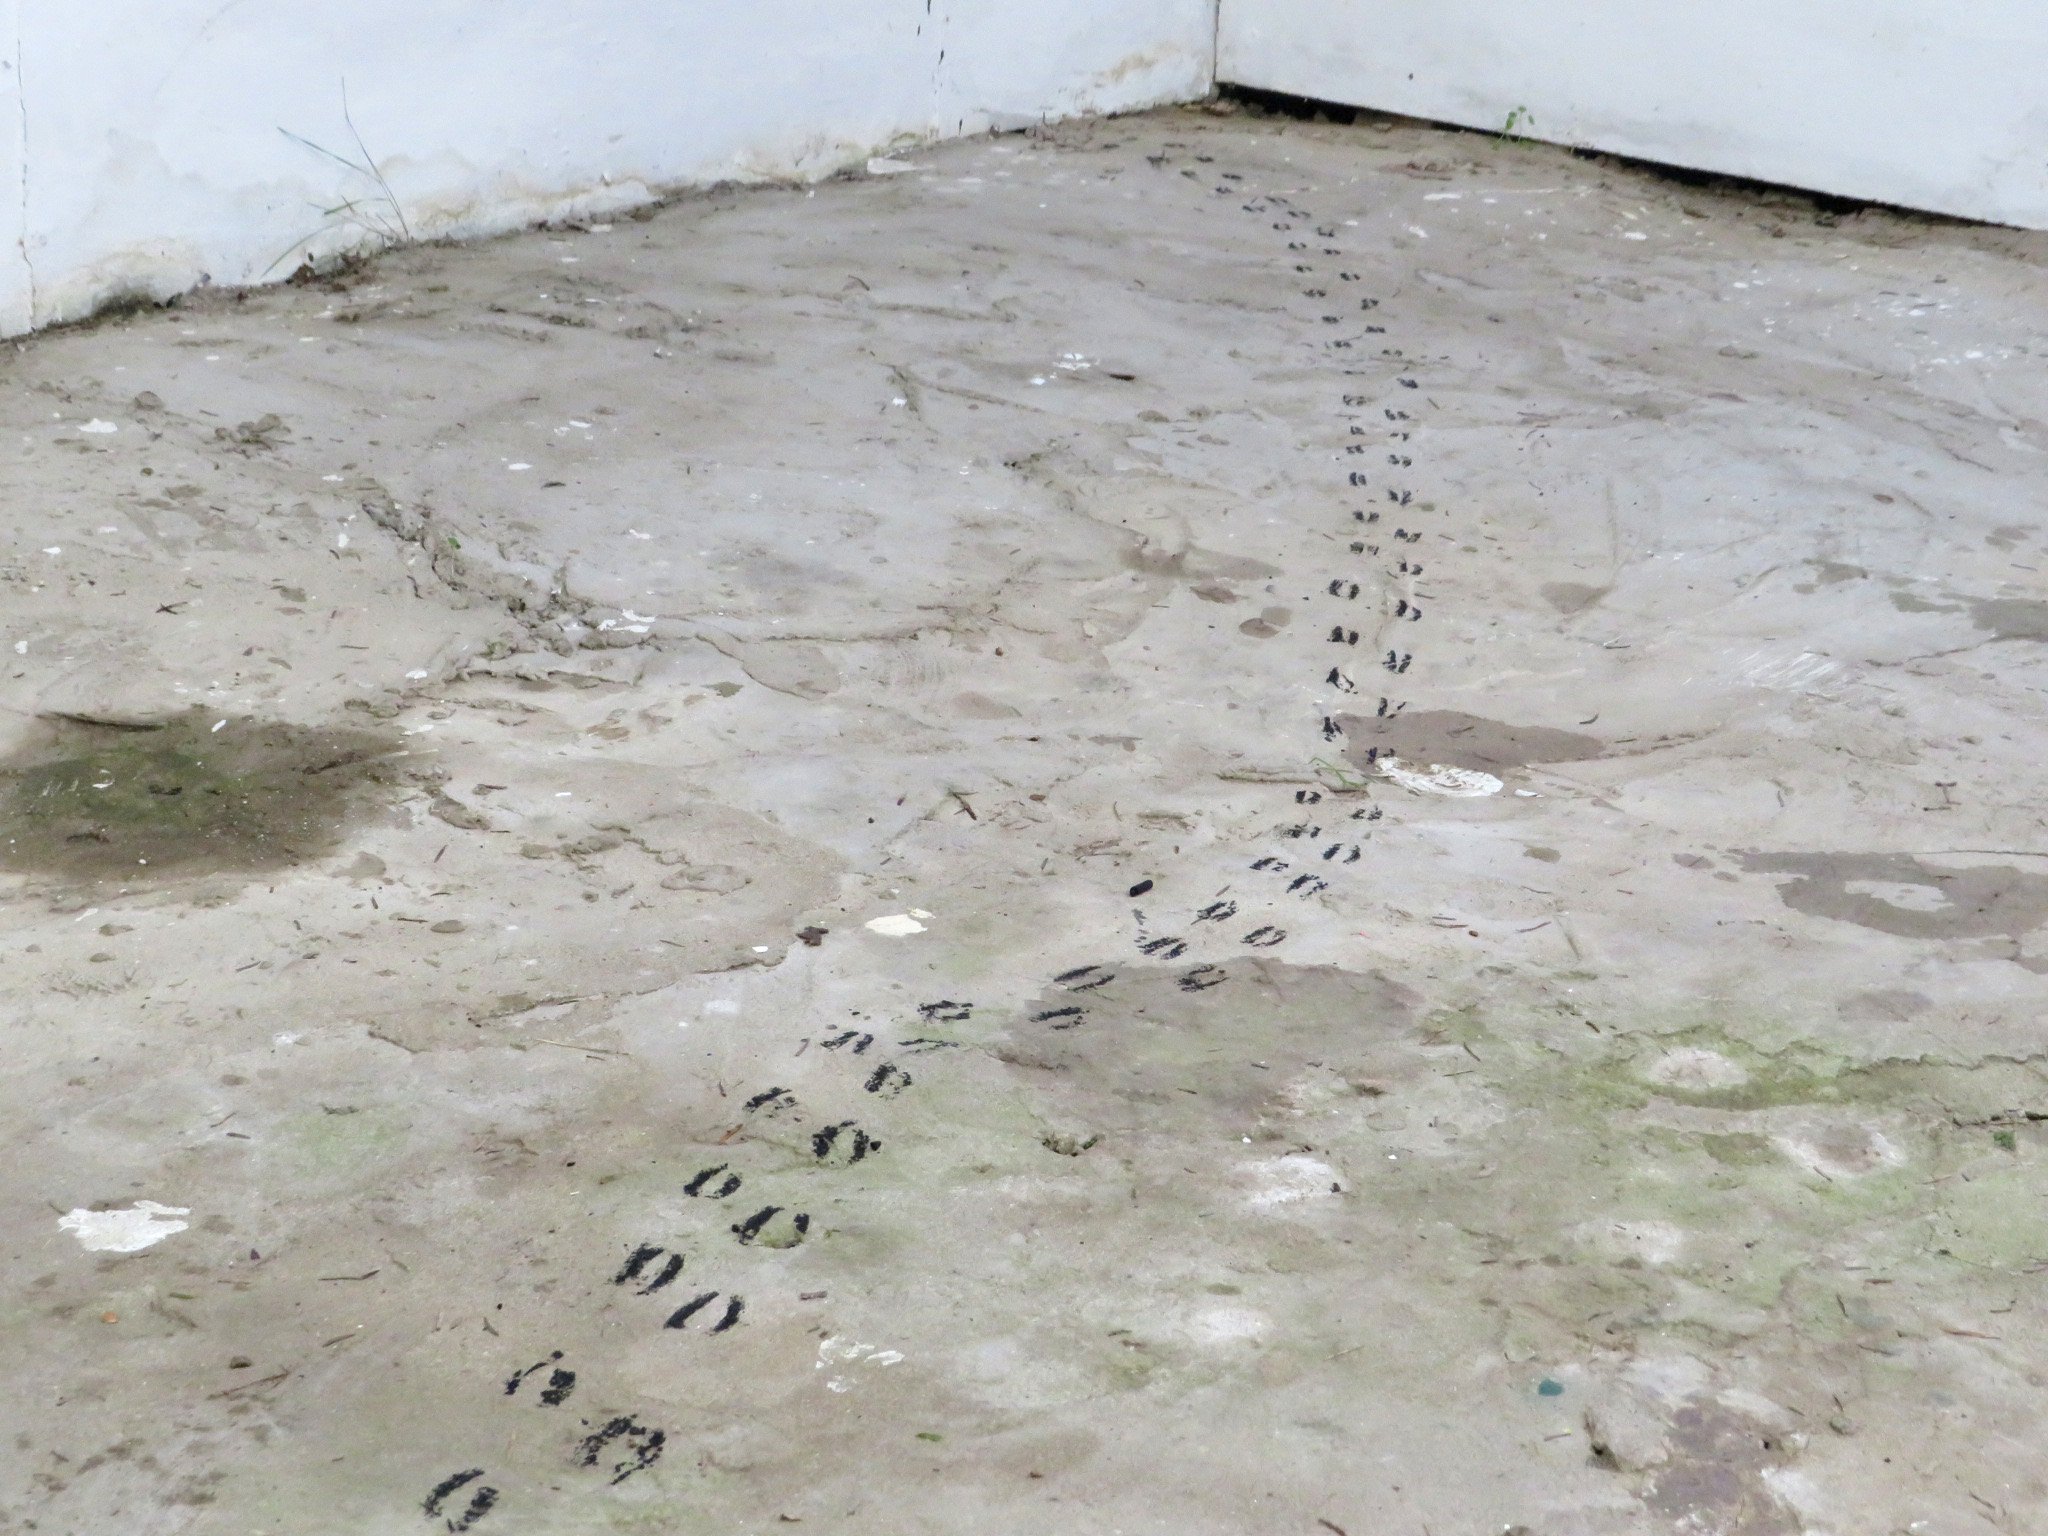 There was once a sheep track underneath this concrete floor, felt it would be fun to reinvent it again!